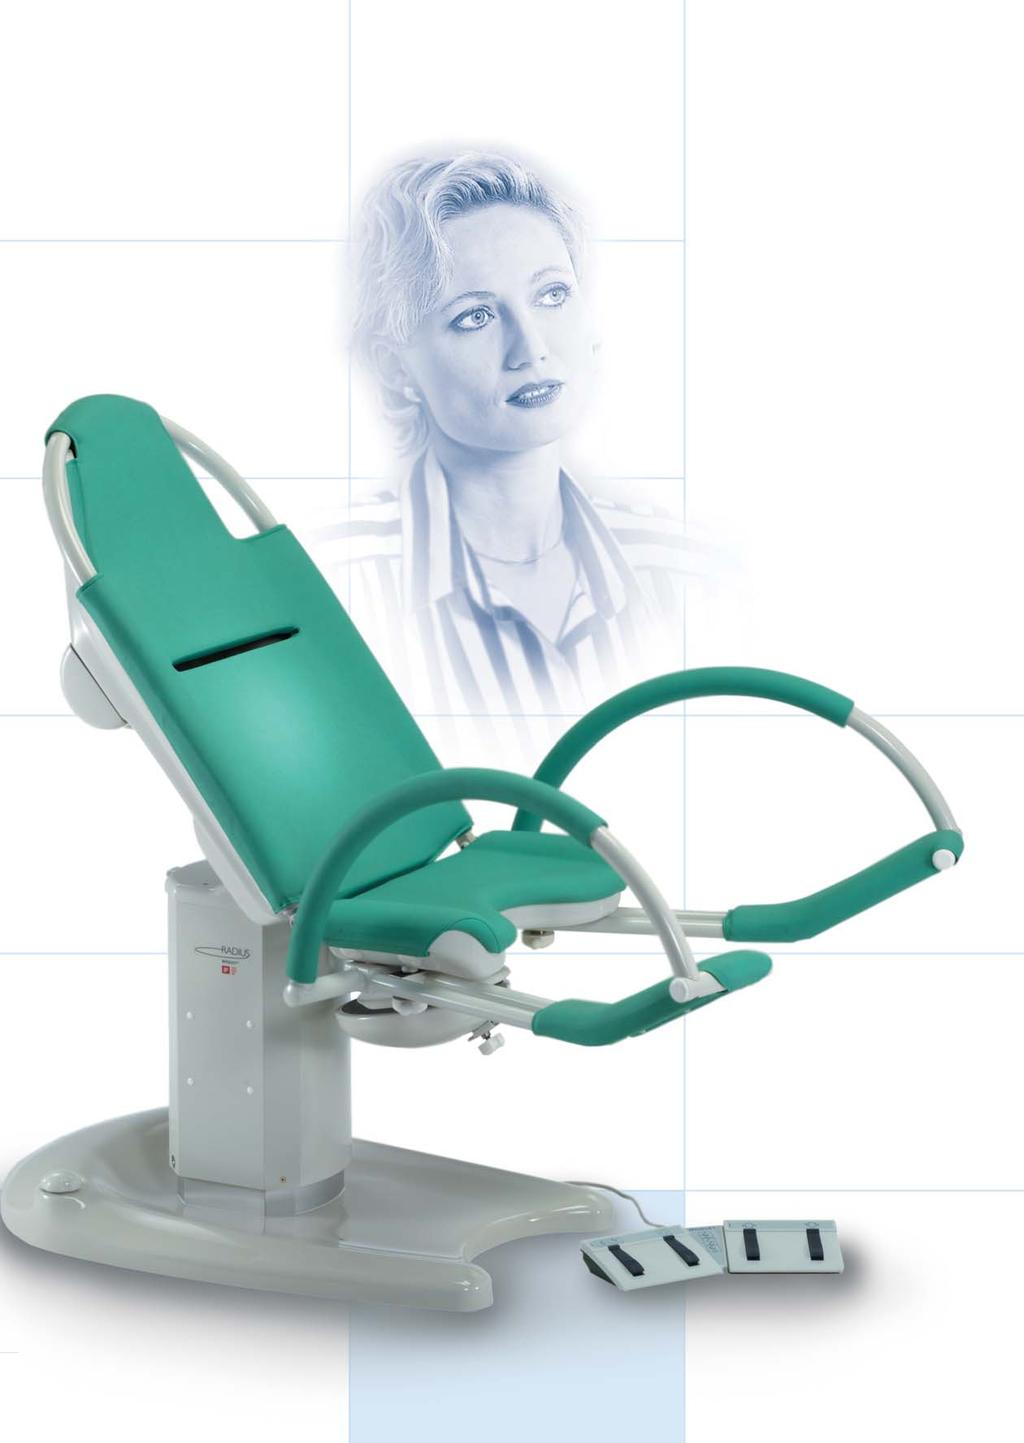 1557.05 Easy mounting, supine positioning, mobile use GYNAECOLOGY One motor for height adjustment One motor for combined seat/back rest adjustment One motor for separate seat adjustment Supine